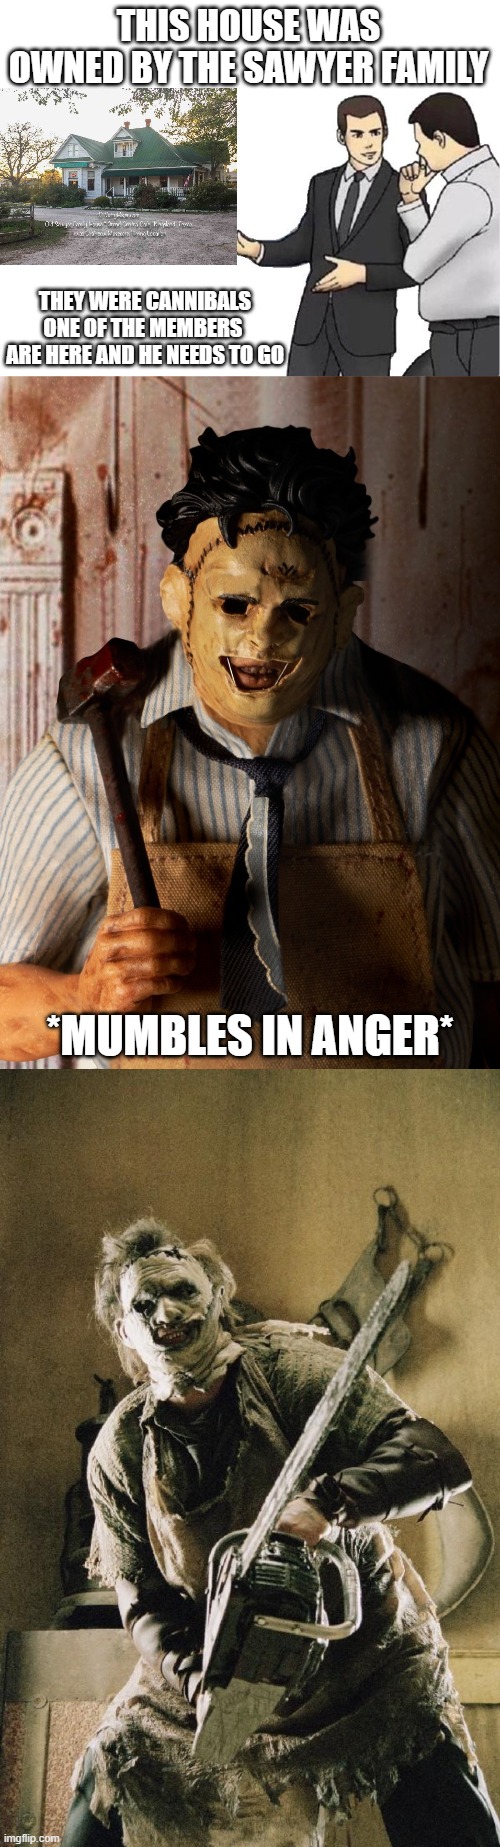 Texas Chainsaw: Home take over | THIS HOUSE WAS OWNED BY THE SAWYER FAMILY; THEY WERE CANNIBALS
ONE OF THE MEMBERS 
ARE HERE AND HE NEEDS TO GO; *MUMBLES IN ANGER* | image tagged in memes,car salesman slaps hood,leatherface | made w/ Imgflip meme maker